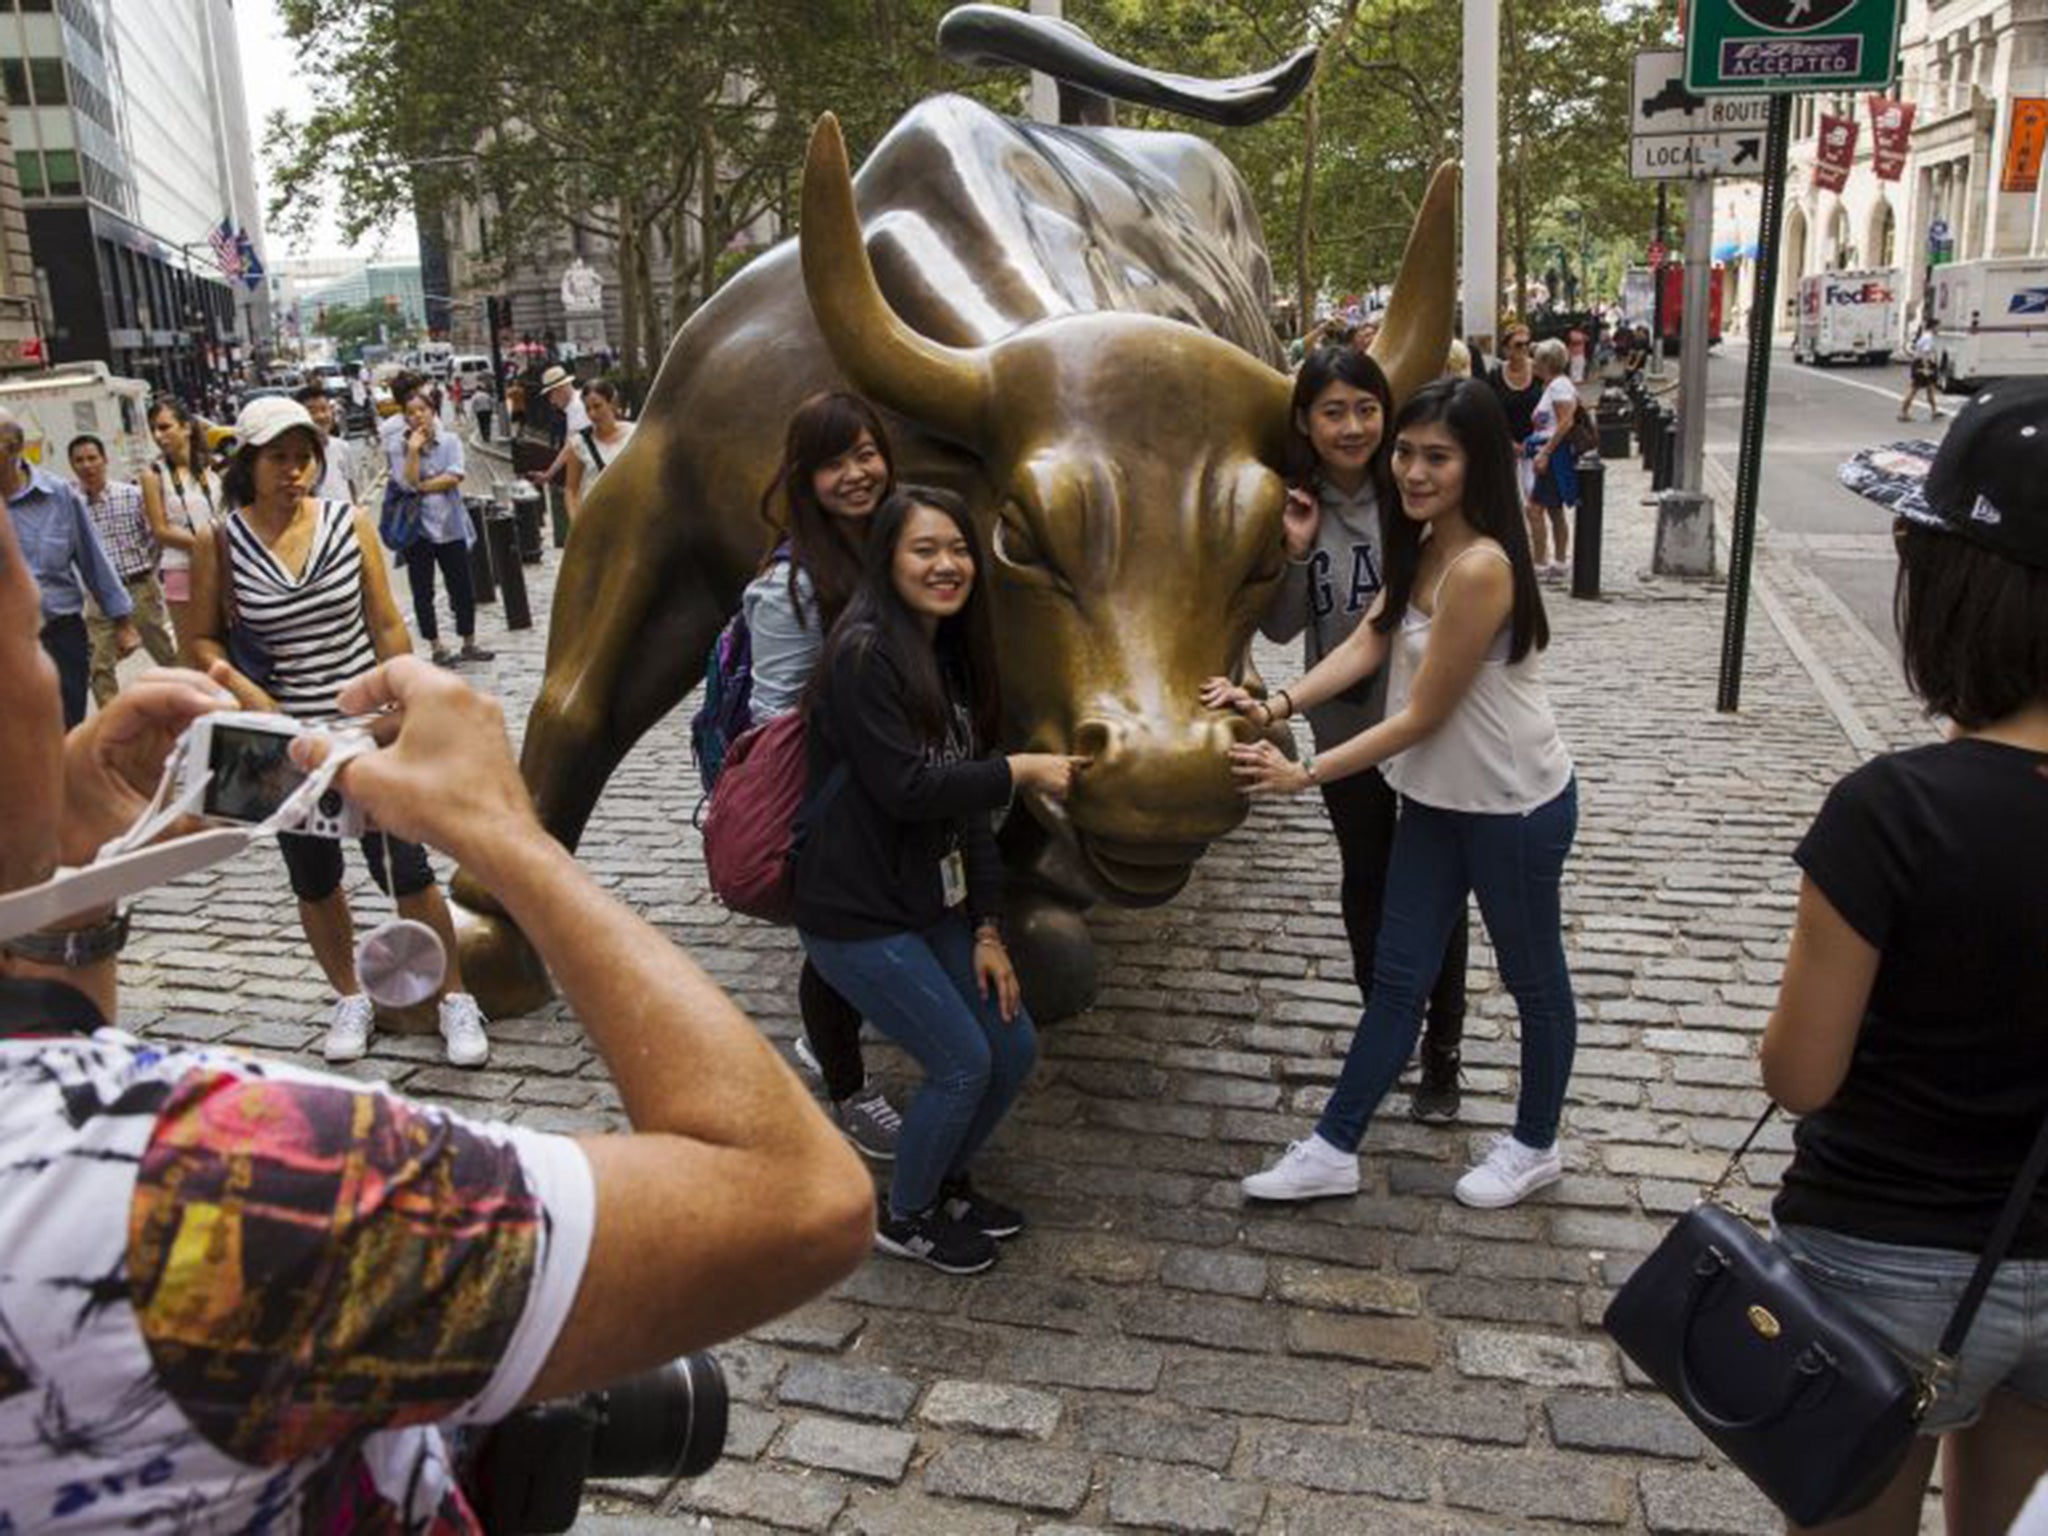 Wall Street’s Bull pulls the crowds, but investors should not confuse brains with a bull run